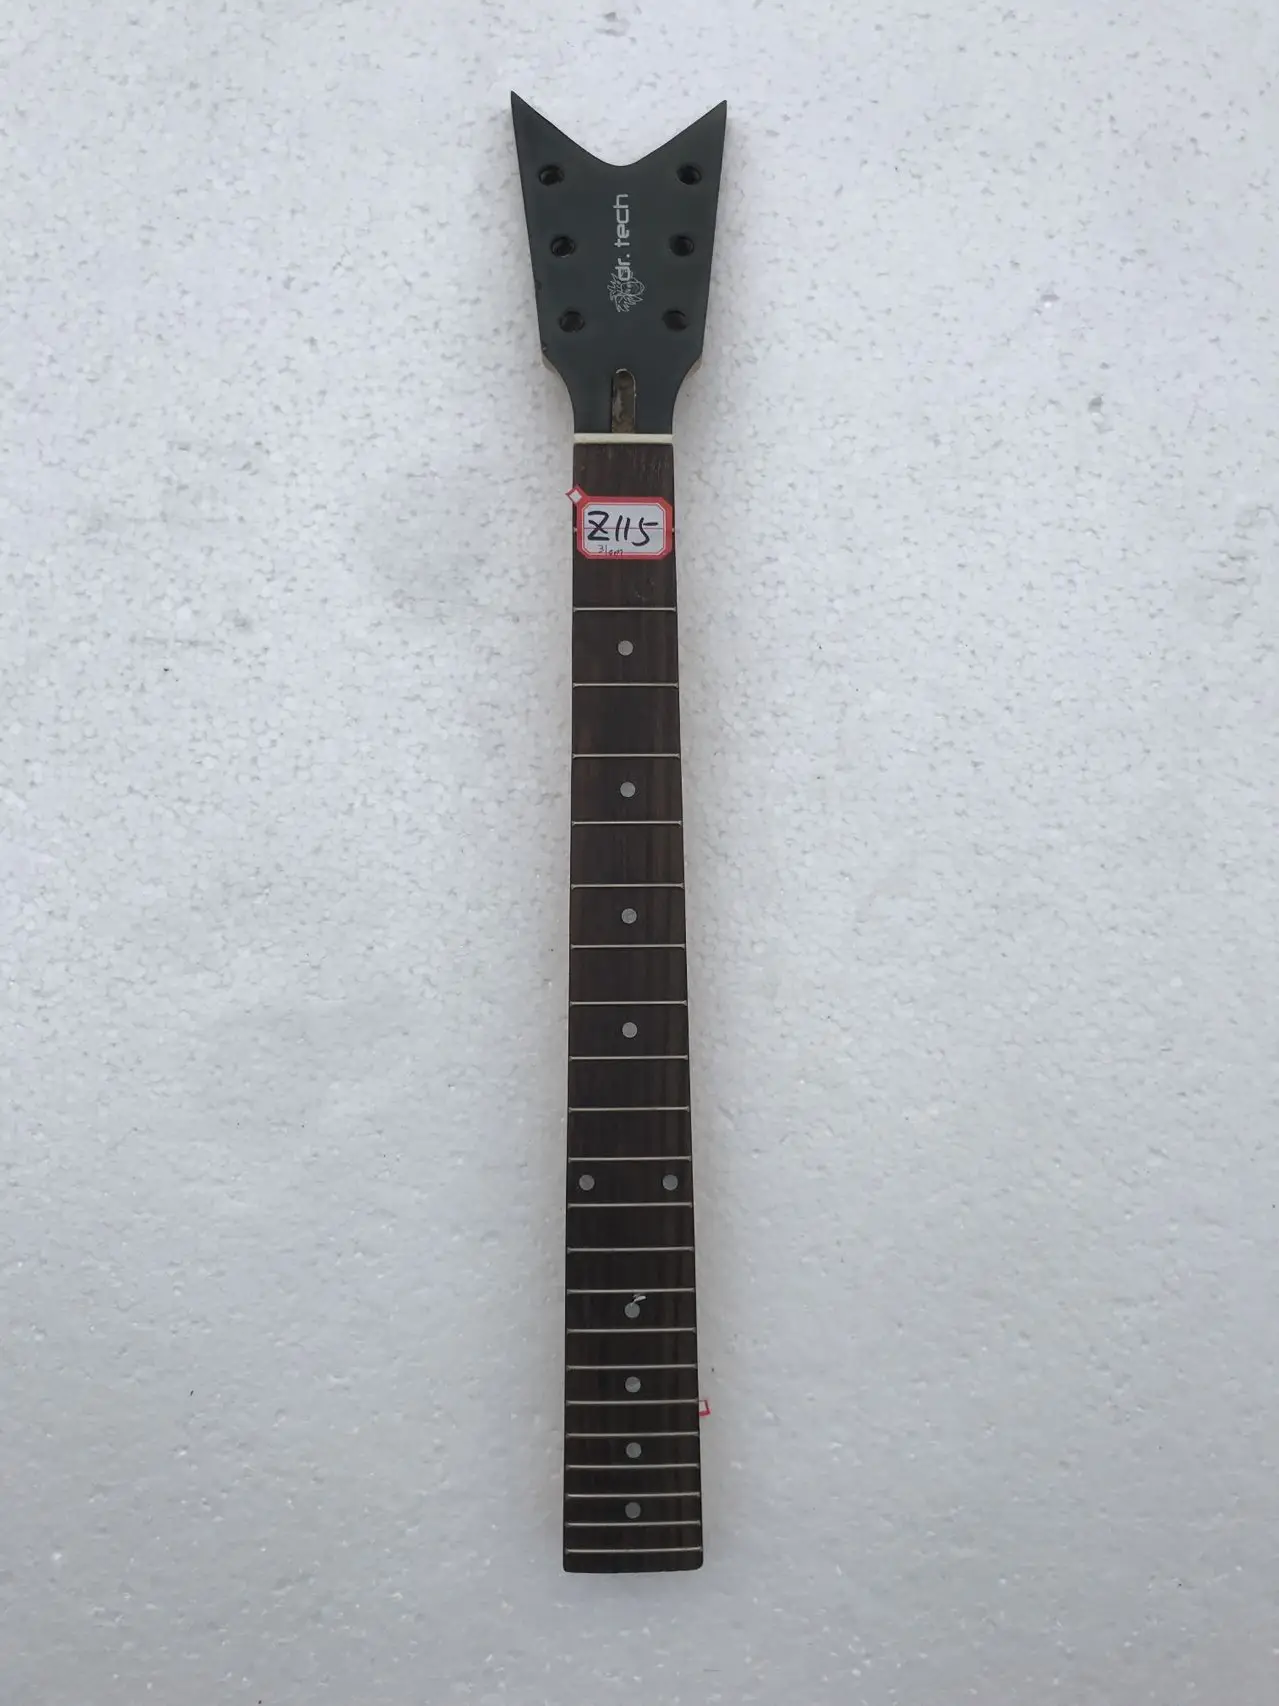 DIY (Not New) Neck for Electric Guitar Discount In Stock Bigsale Z115